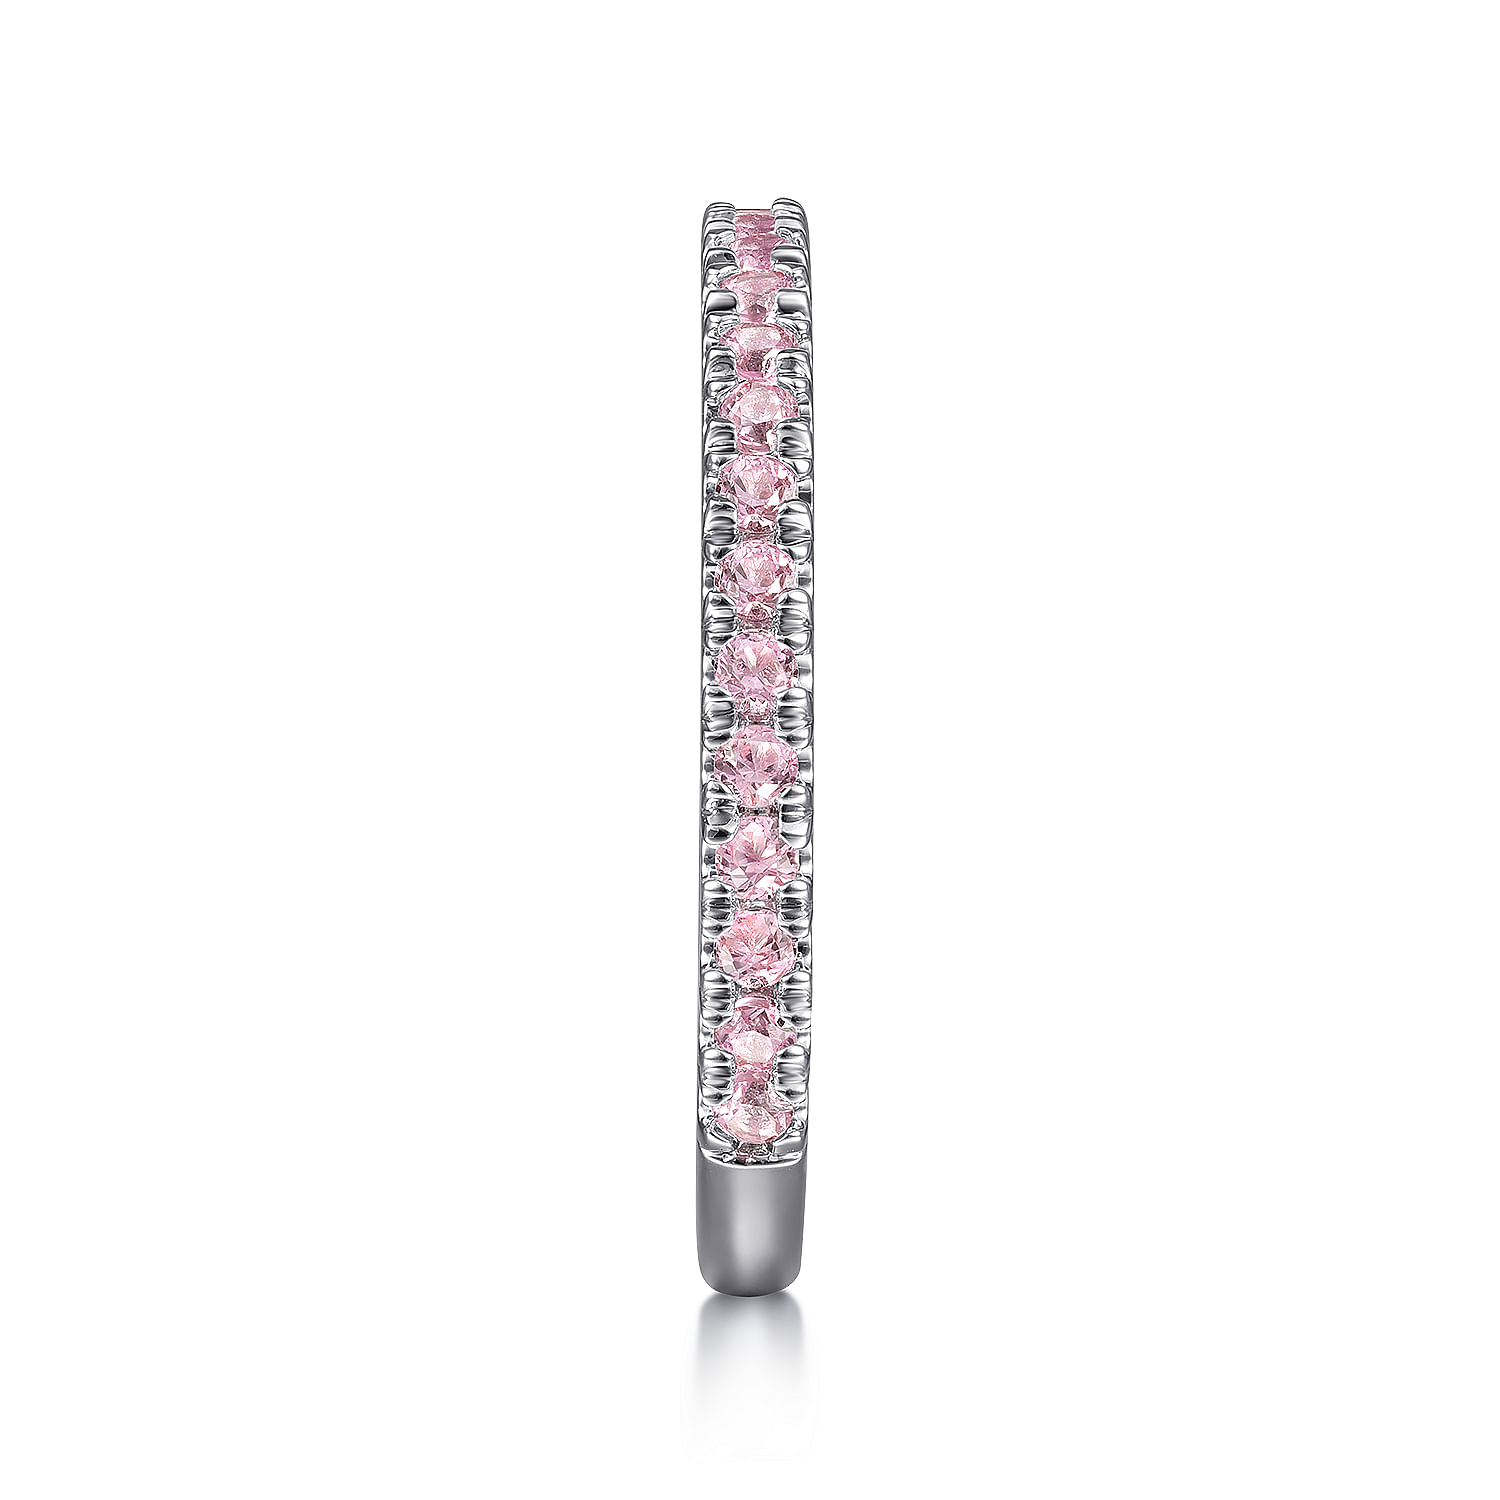 14K White Gold Pink Created Zircon Stackable Ring